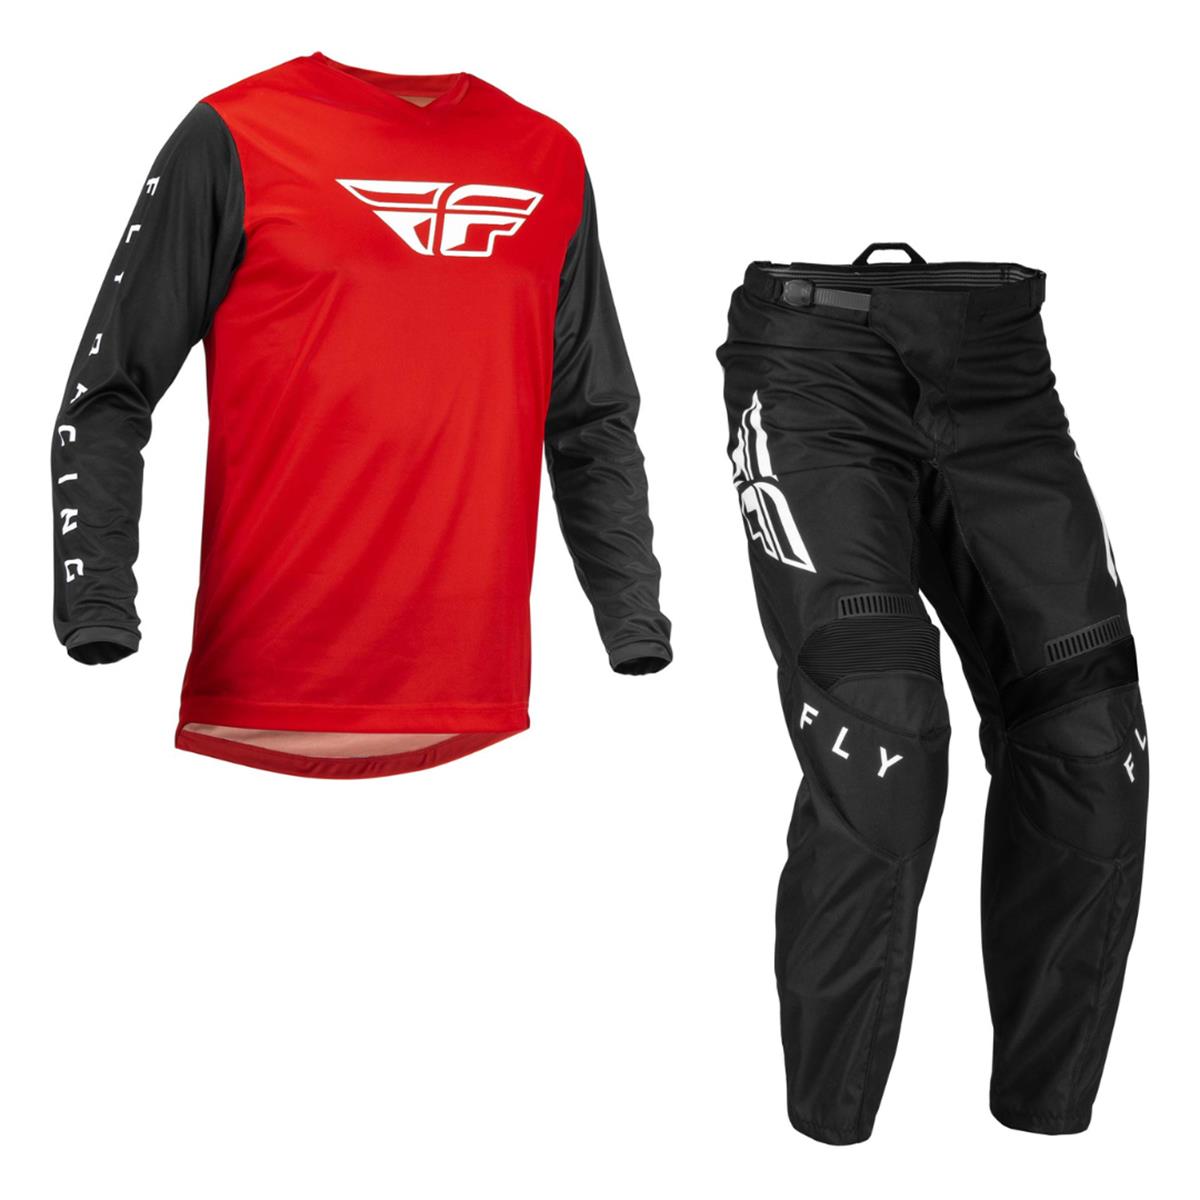 Fly Racing MX Gear Kit F-16 Set: 2 pieces, Red/Black/White